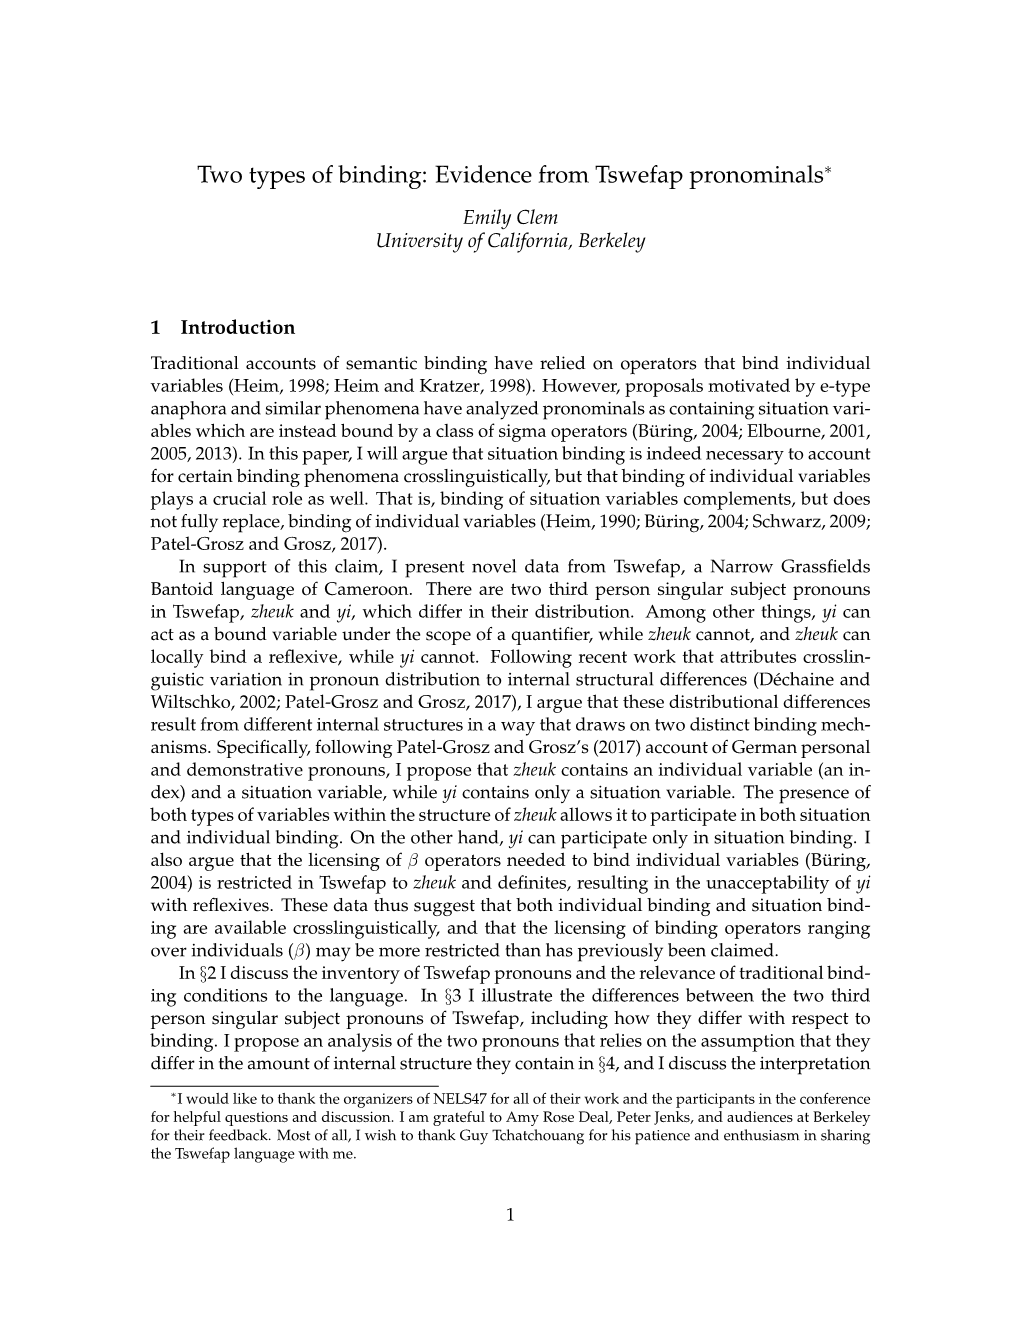 Two Types of Binding: Evidence from Tswefap Pronominals∗